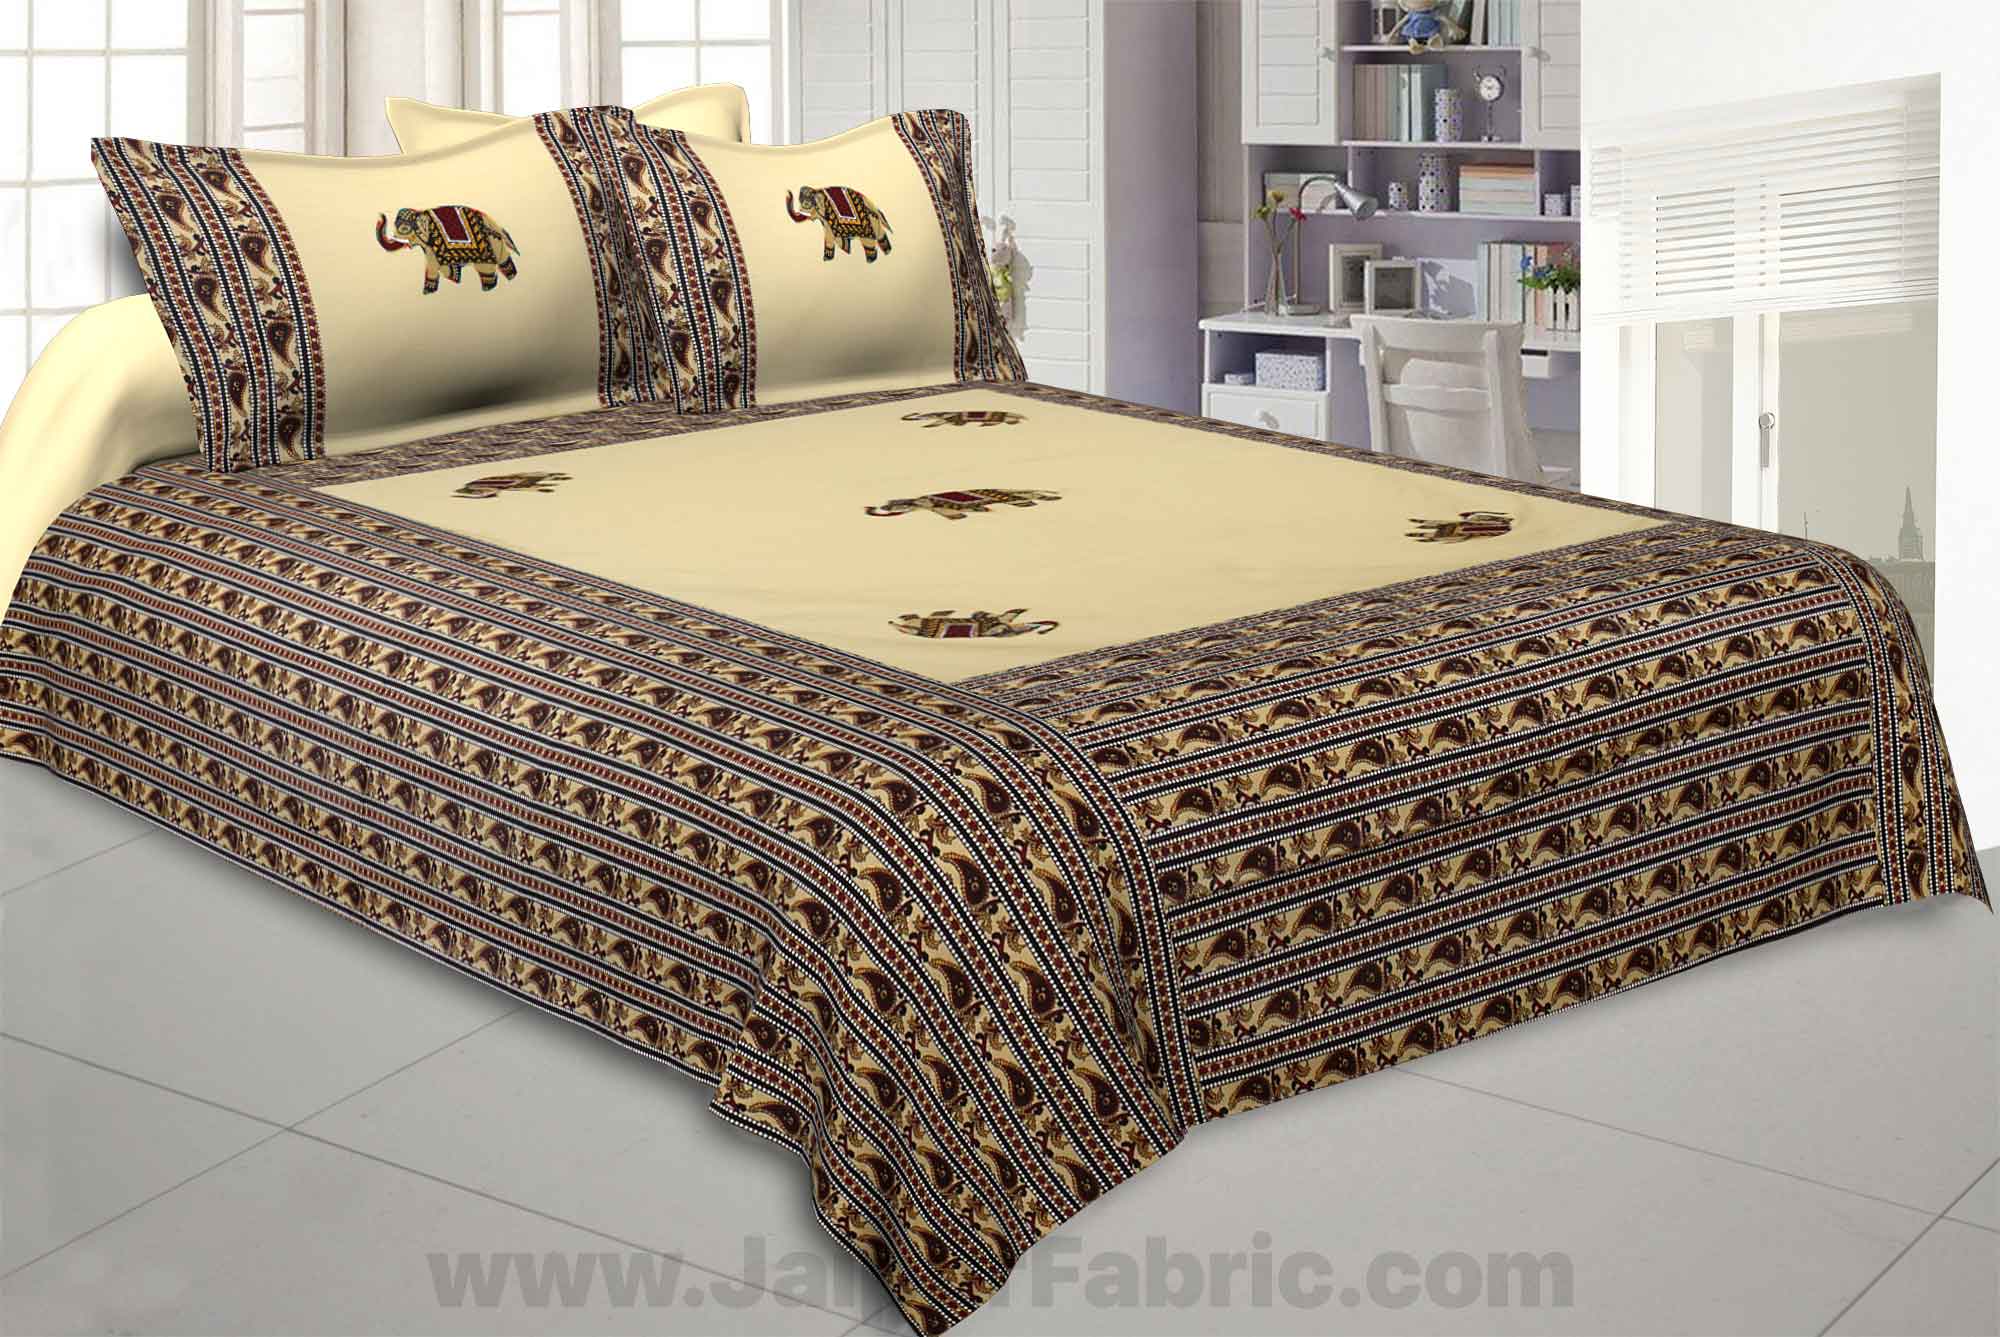 Applique Cream Elephant Jaipuri  Hand Made Embroidery Patch Work Double Bedsheet